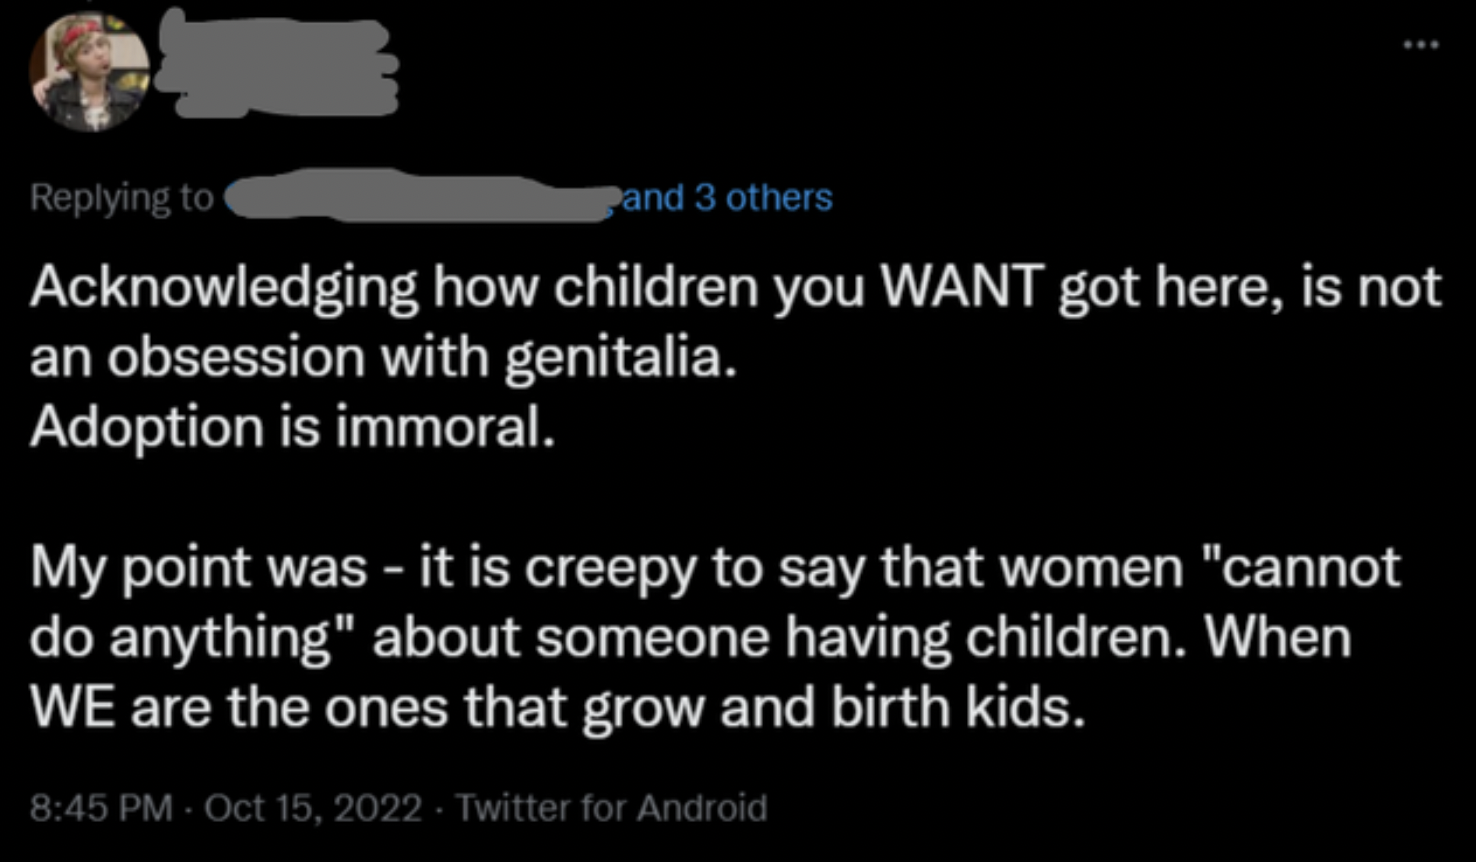 Crazy People of Facebook - Acknowledging how children you Want got here, is not an obsession with genitalia. Adoption is immoral. My point was it is creepy to say that women